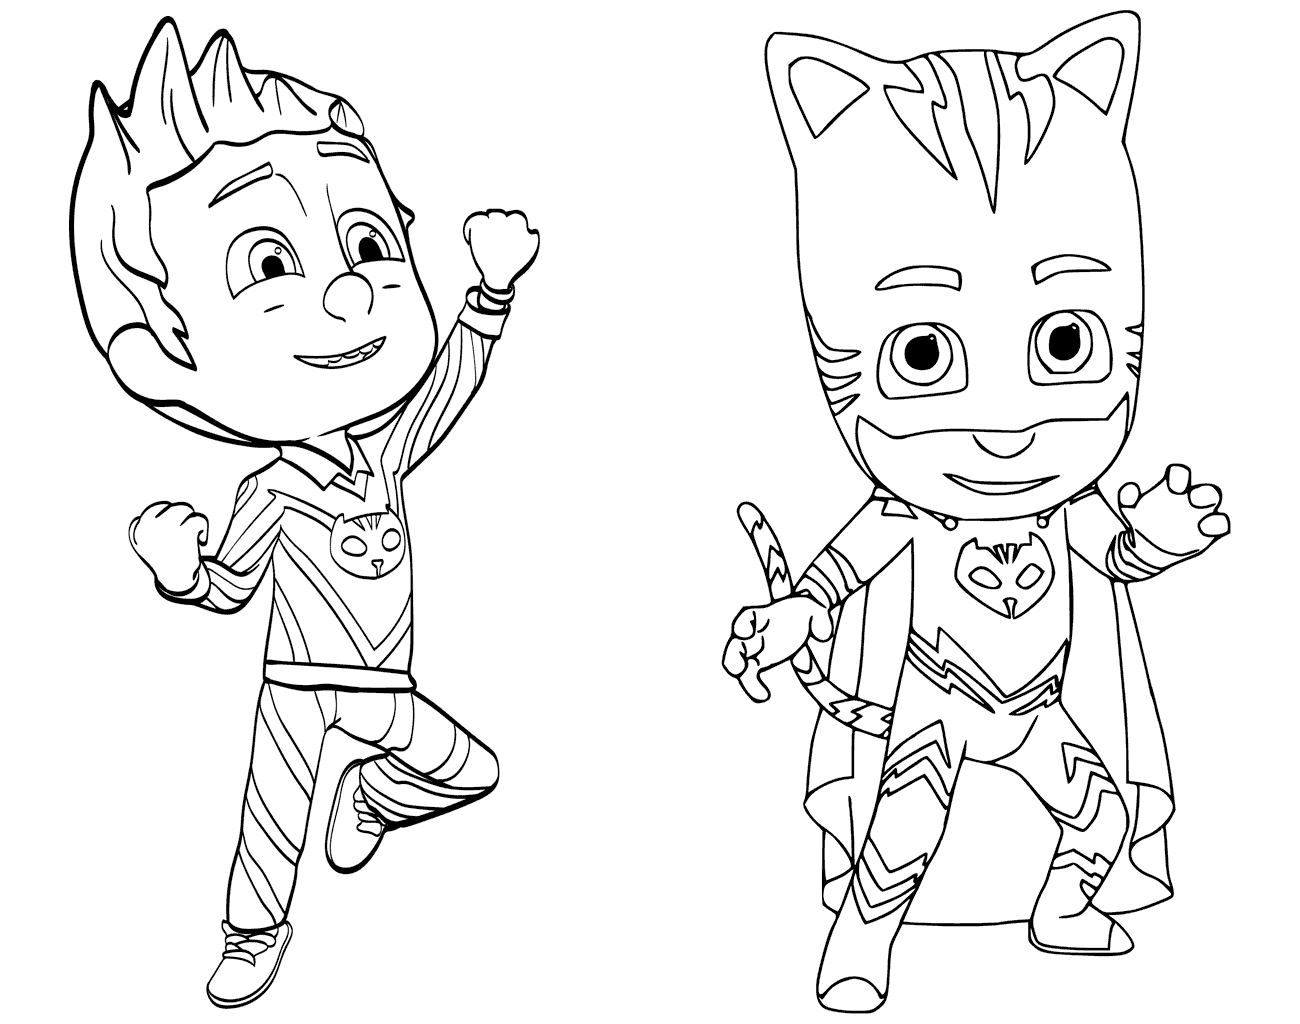 Pajama Hero Connor Is Catboy From PJ Masks Coloring Page